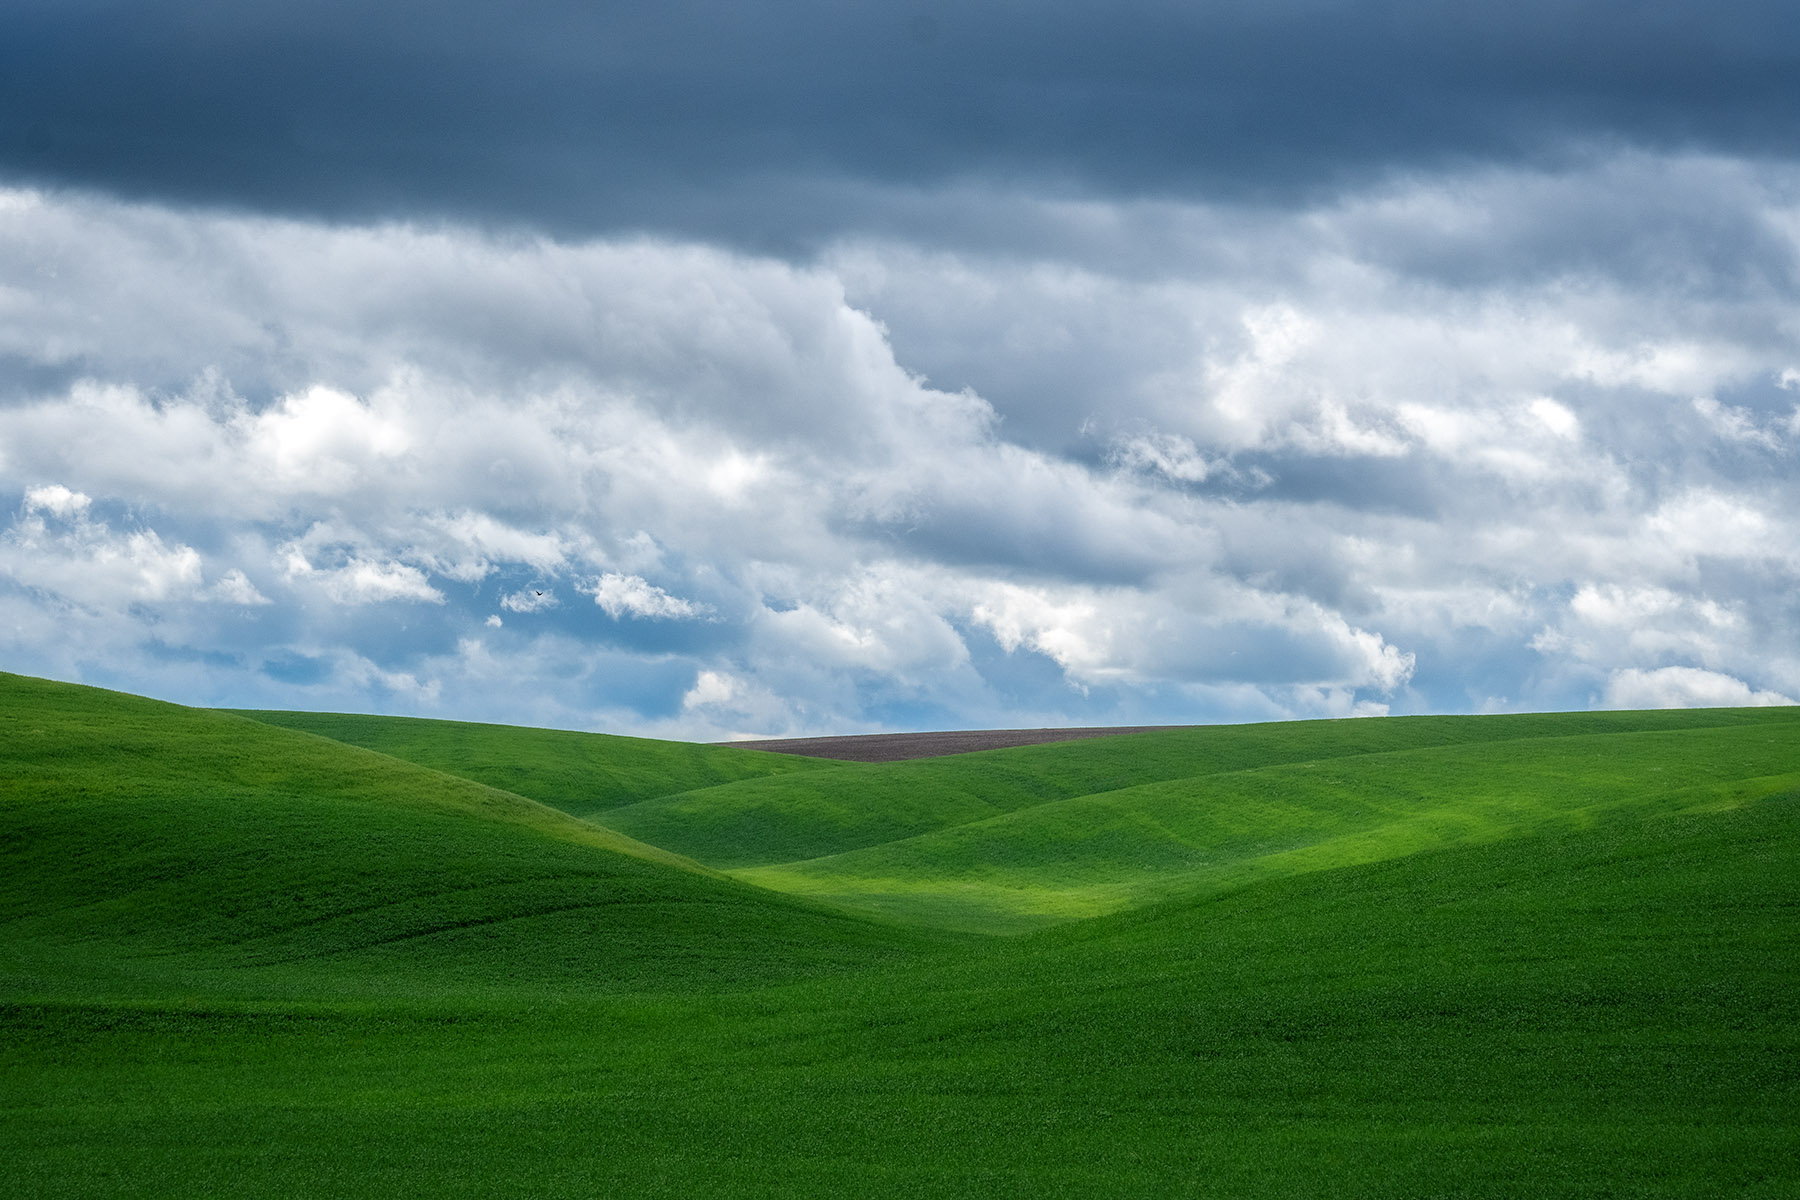 green wheat fields and cloudy skies in the Palouse area